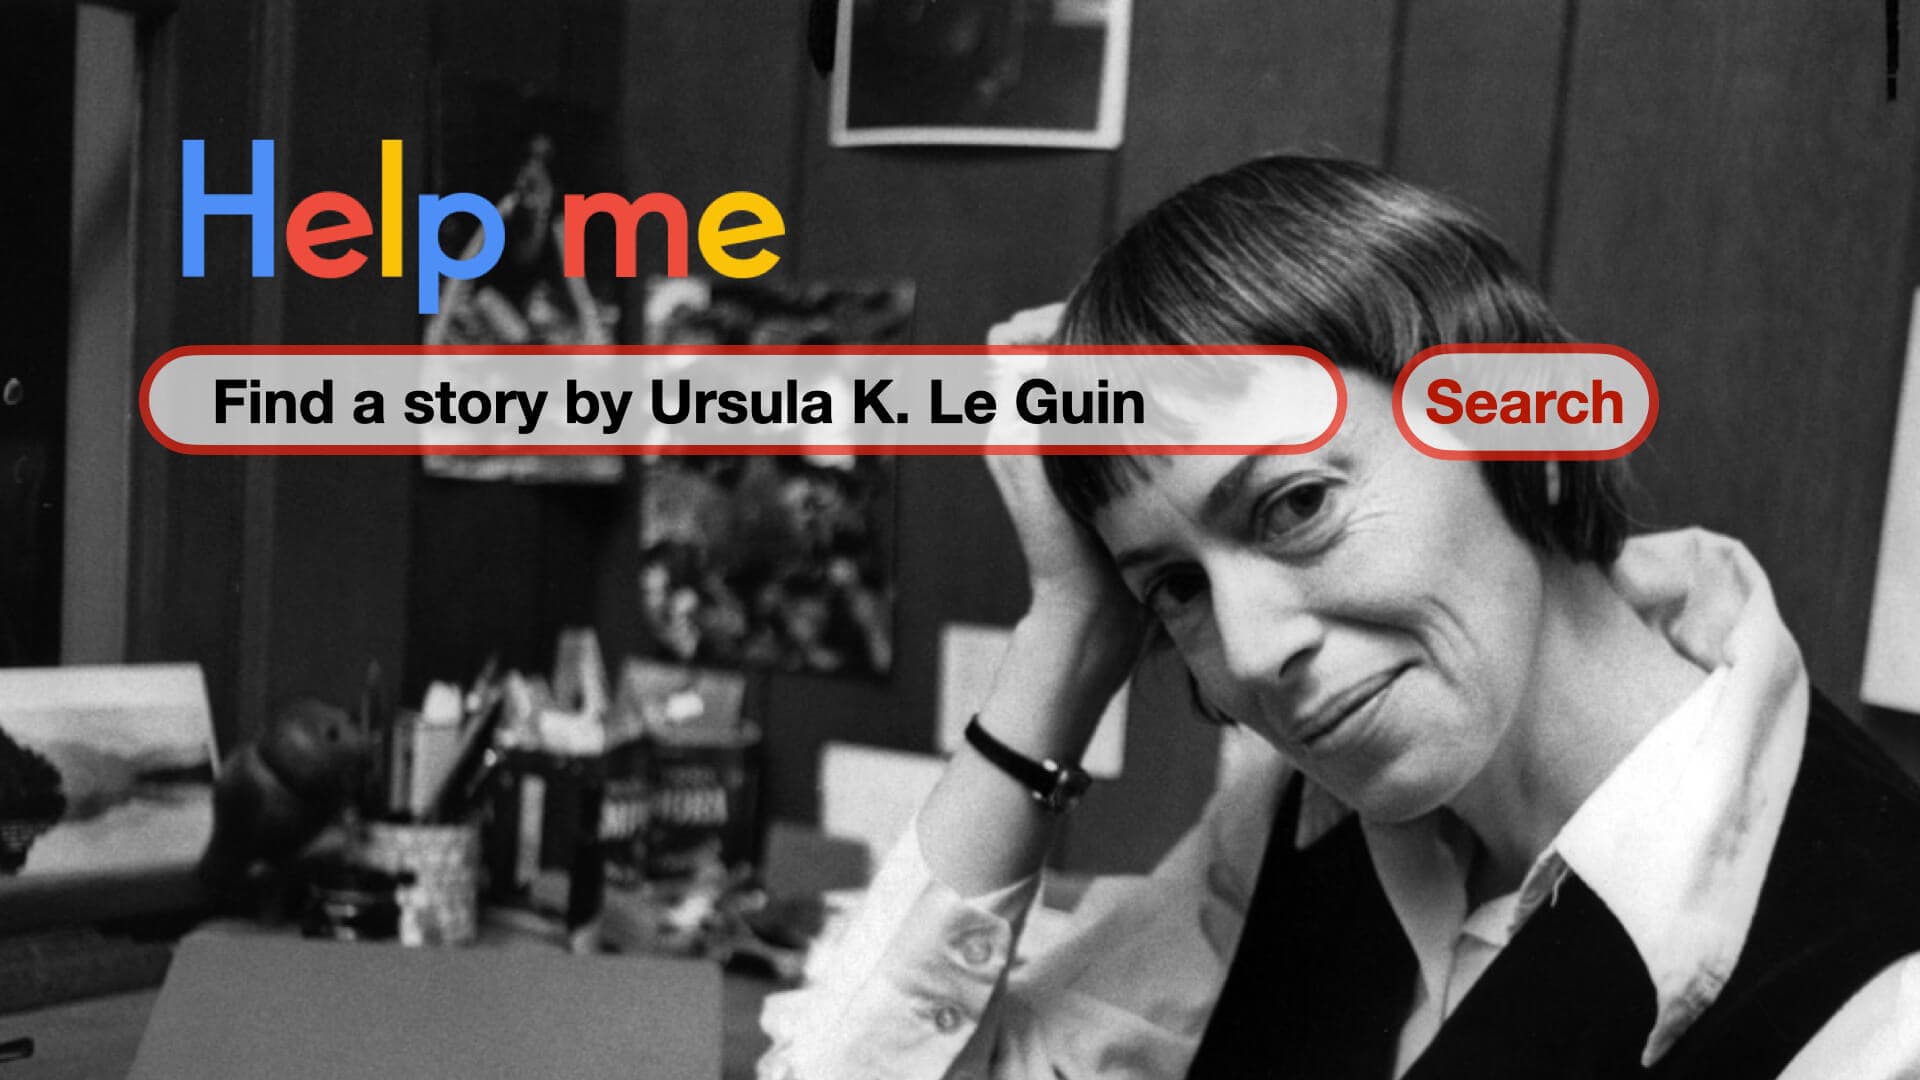 Help me, find a story by Ursula Le Guin